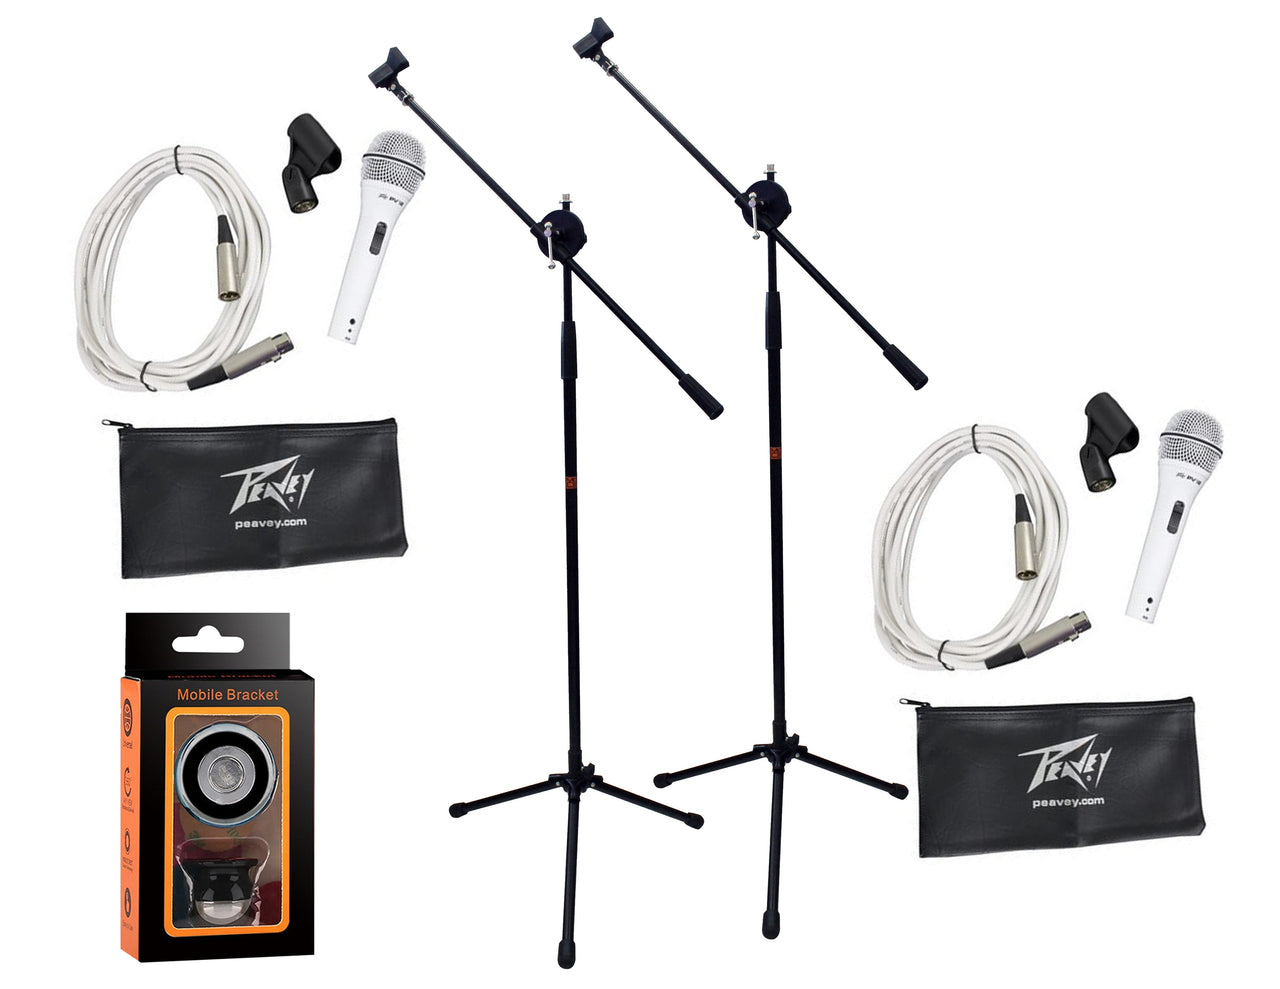 (2) Peavey Pvi2 White Microphone w/Mic Clip & Carrying Bag + (2) Mr. Dj Microphone Stand Series + (2) 20 Feet XLR to XLR White Cable